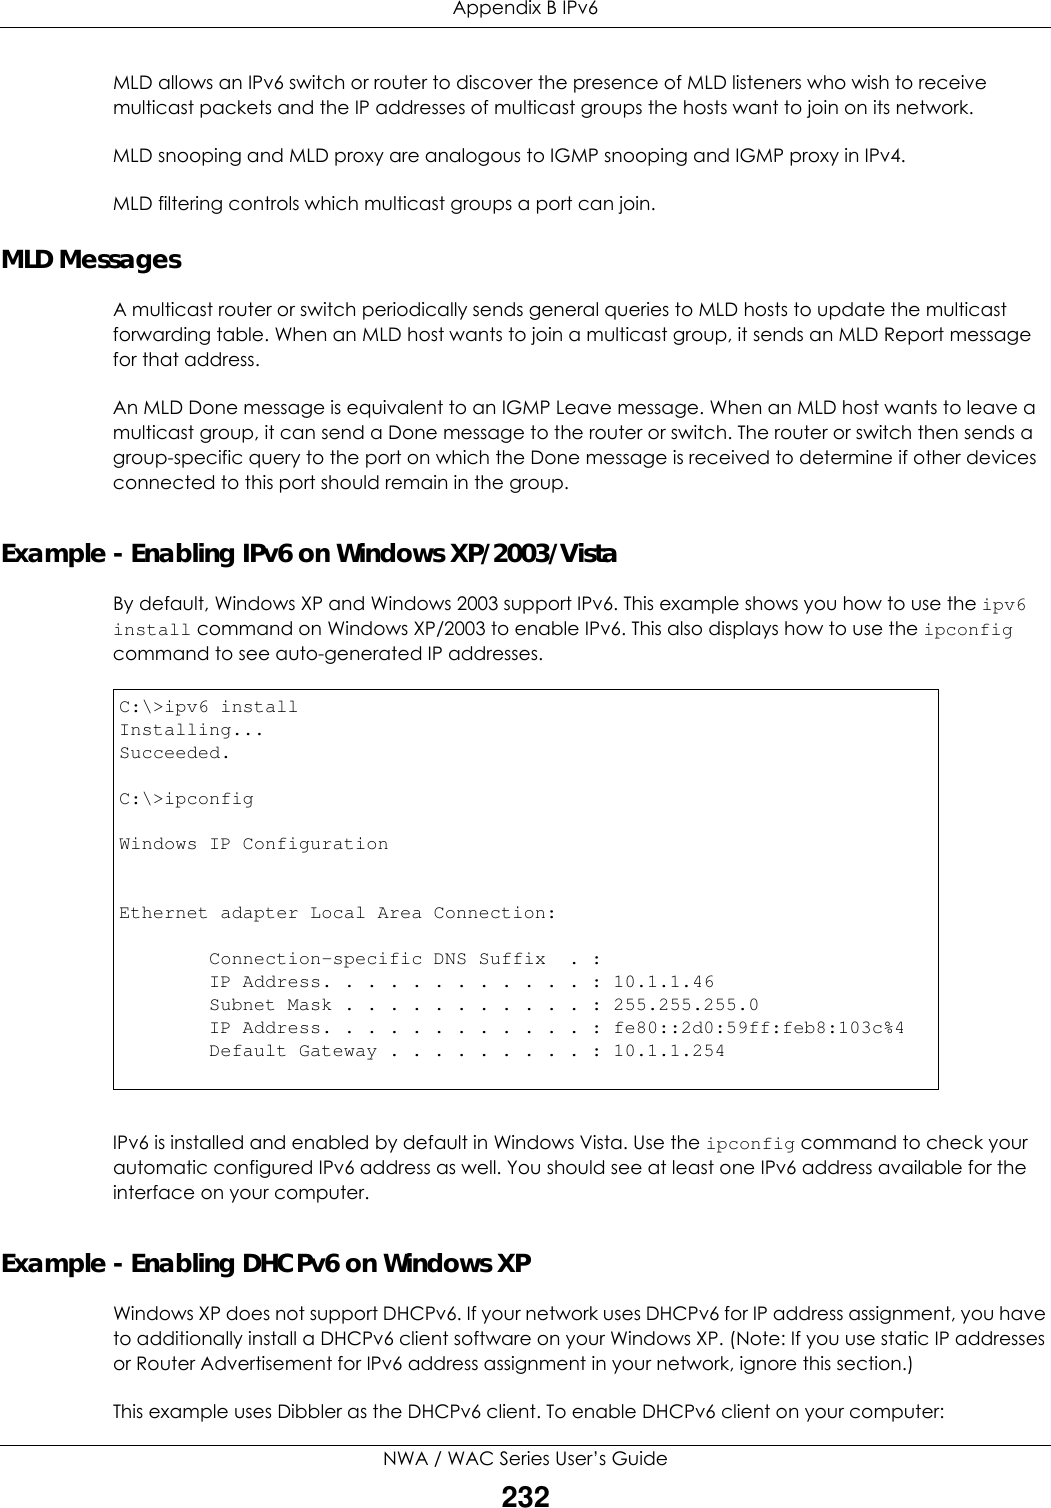 Appendix B IPv6NWA / WAC Series User’s Guide232MLD allows an IPv6 switch or router to discover the presence of MLD listeners who wish to receive multicast packets and the IP addresses of multicast groups the hosts want to join on its network.  MLD snooping and MLD proxy are analogous to IGMP snooping and IGMP proxy in IPv4. MLD filtering controls which multicast groups a port can join.MLD MessagesA multicast router or switch periodically sends general queries to MLD hosts to update the multicast forwarding table. When an MLD host wants to join a multicast group, it sends an MLD Report message for that address.An MLD Done message is equivalent to an IGMP Leave message. When an MLD host wants to leave a multicast group, it can send a Done message to the router or switch. The router or switch then sends a group-specific query to the port on which the Done message is received to determine if other devices connected to this port should remain in the group.Example - Enabling IPv6 on Windows XP/2003/VistaBy default, Windows XP and Windows 2003 support IPv6. This example shows you how to use the ipv6 install command on Windows XP/2003 to enable IPv6. This also displays how to use the ipconfig command to see auto-generated IP addresses.IPv6 is installed and enabled by default in Windows Vista. Use the ipconfig command to check your automatic configured IPv6 address as well. You should see at least one IPv6 address available for the interface on your computer.Example - Enabling DHCPv6 on Windows XPWindows XP does not support DHCPv6. If your network uses DHCPv6 for IP address assignment, you have to additionally install a DHCPv6 client software on your Windows XP. (Note: If you use static IP addresses or Router Advertisement for IPv6 address assignment in your network, ignore this section.)This example uses Dibbler as the DHCPv6 client. To enable DHCPv6 client on your computer:C:\&gt;ipv6 installInstalling...Succeeded.C:\&gt;ipconfigWindows IP ConfigurationEthernet adapter Local Area Connection:        Connection-specific DNS Suffix  . :         IP Address. . . . . . . . . . . . : 10.1.1.46        Subnet Mask . . . . . . . . . . . : 255.255.255.0        IP Address. . . . . . . . . . . . : fe80::2d0:59ff:feb8:103c%4        Default Gateway . . . . . . . . . : 10.1.1.254